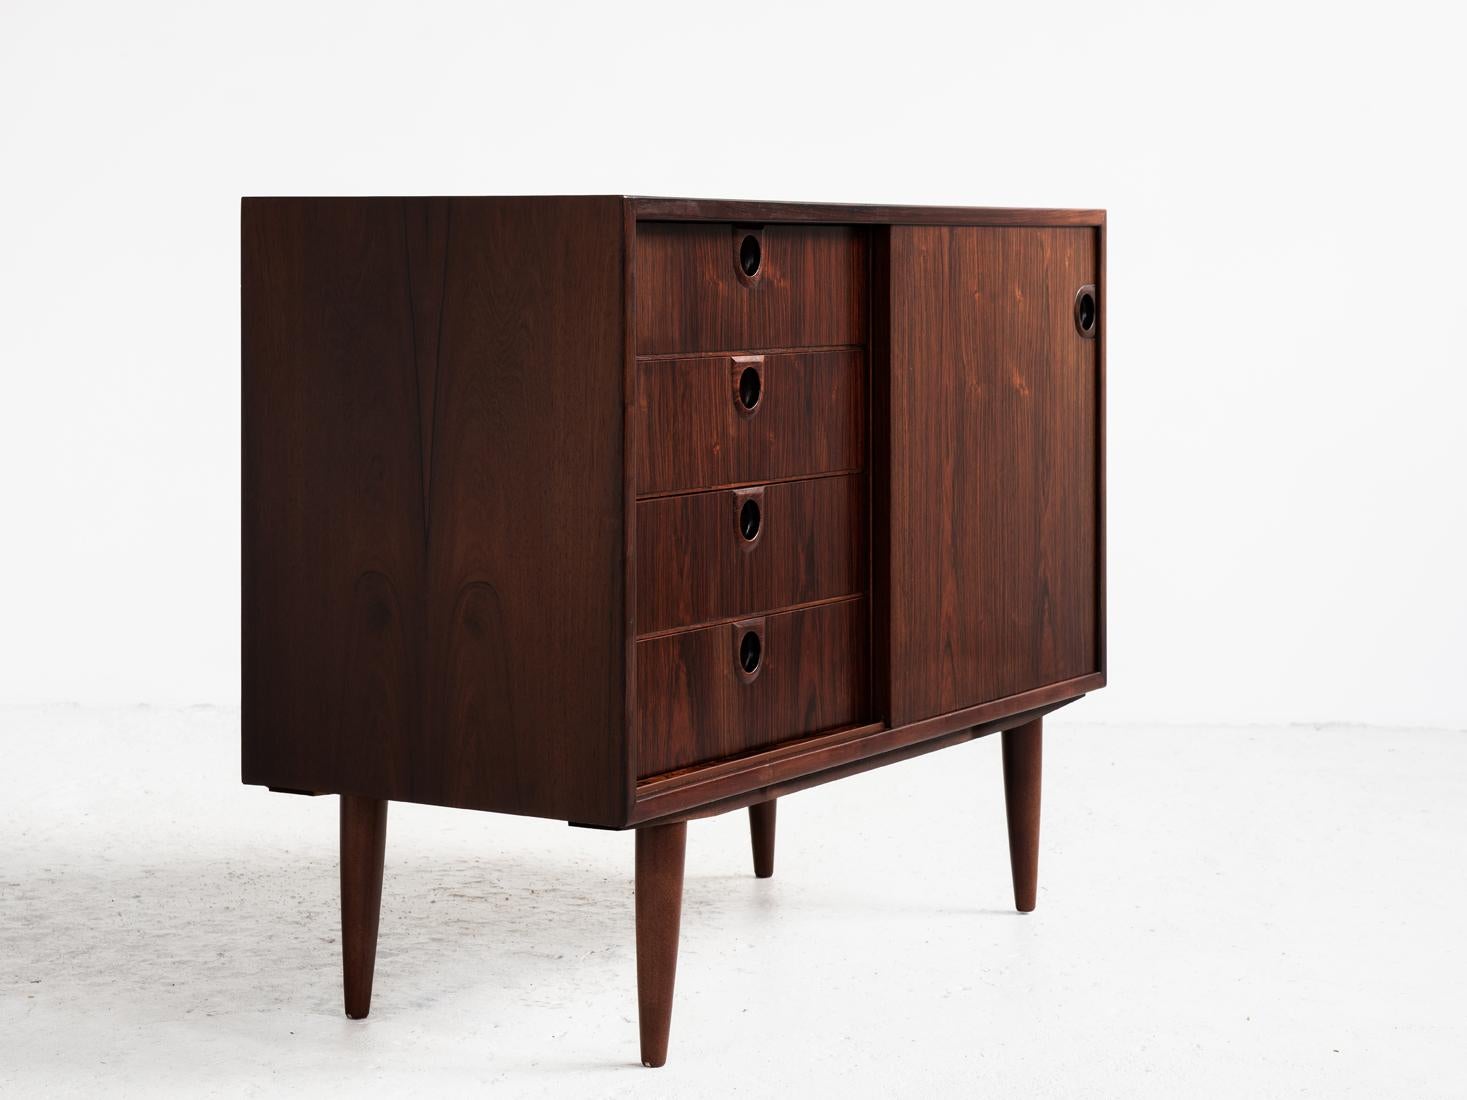 Mid-Century Modern Midcentury Danish Sideboard in Rosewood with 1 Sliding Door and 4 Drawers